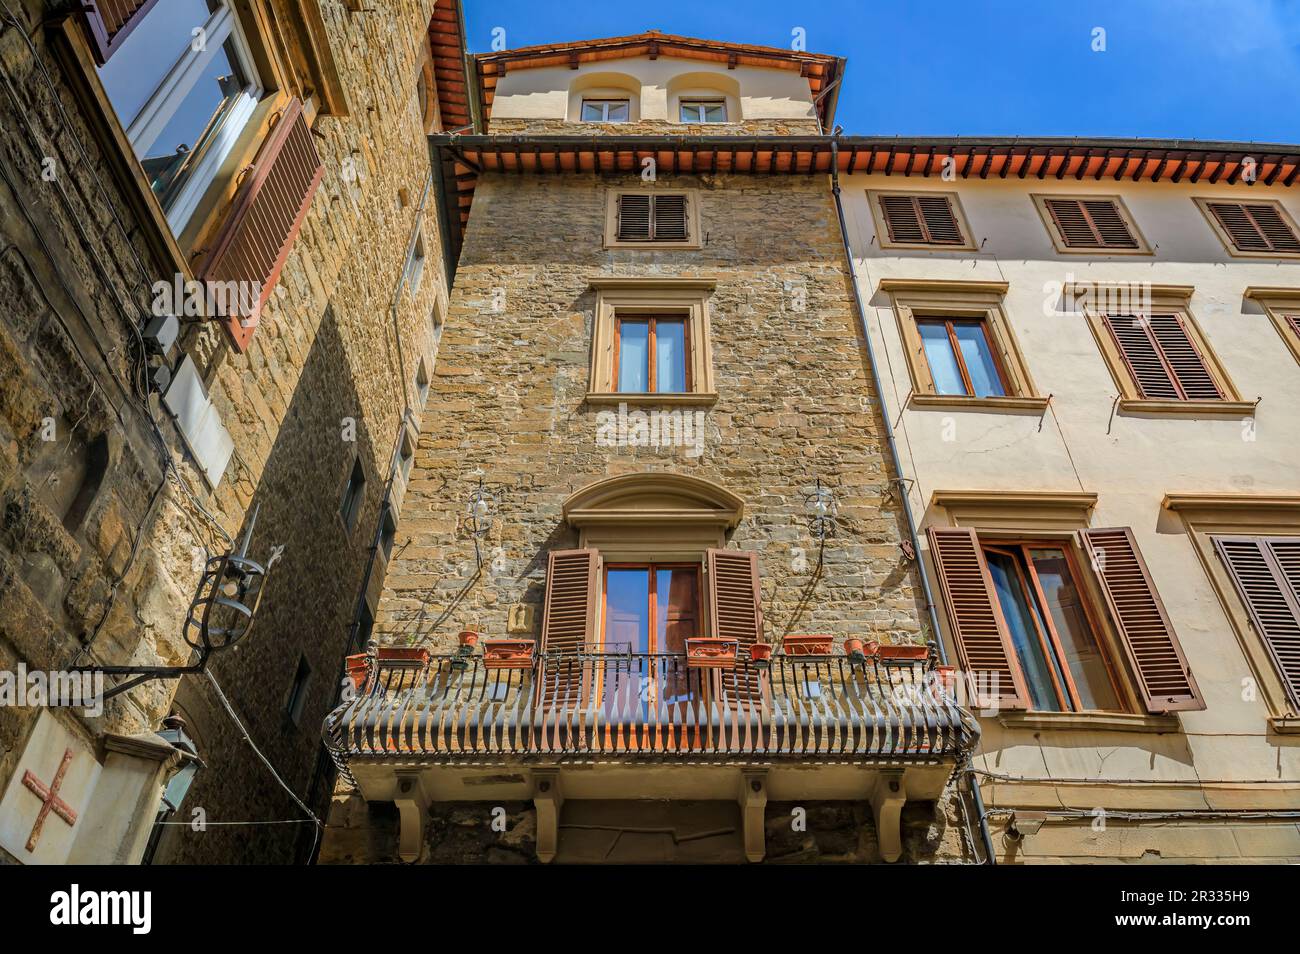 Medieval Renaissance gothic tower buildings along a narrow street in Centro Storico or Historic Centre of Florence, Italy Stock Photo